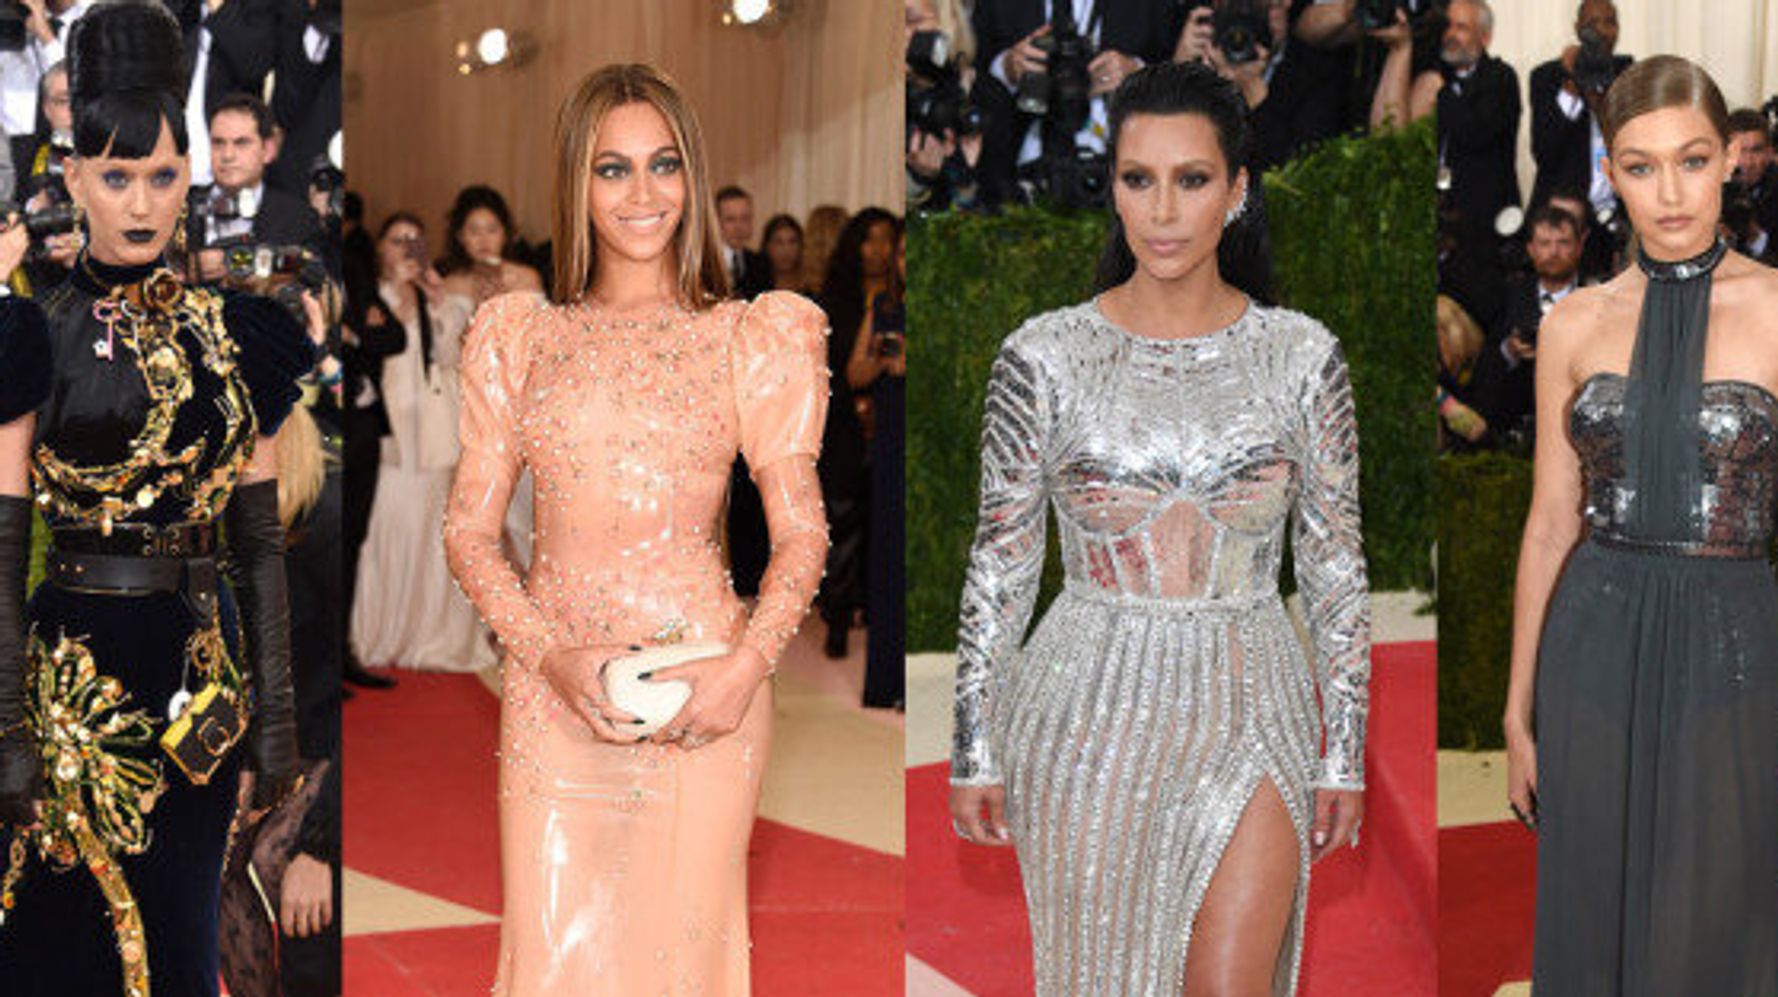 Met Gala 2016: The Best And Worst Dressed Stars Of The Night | HuffPost ...